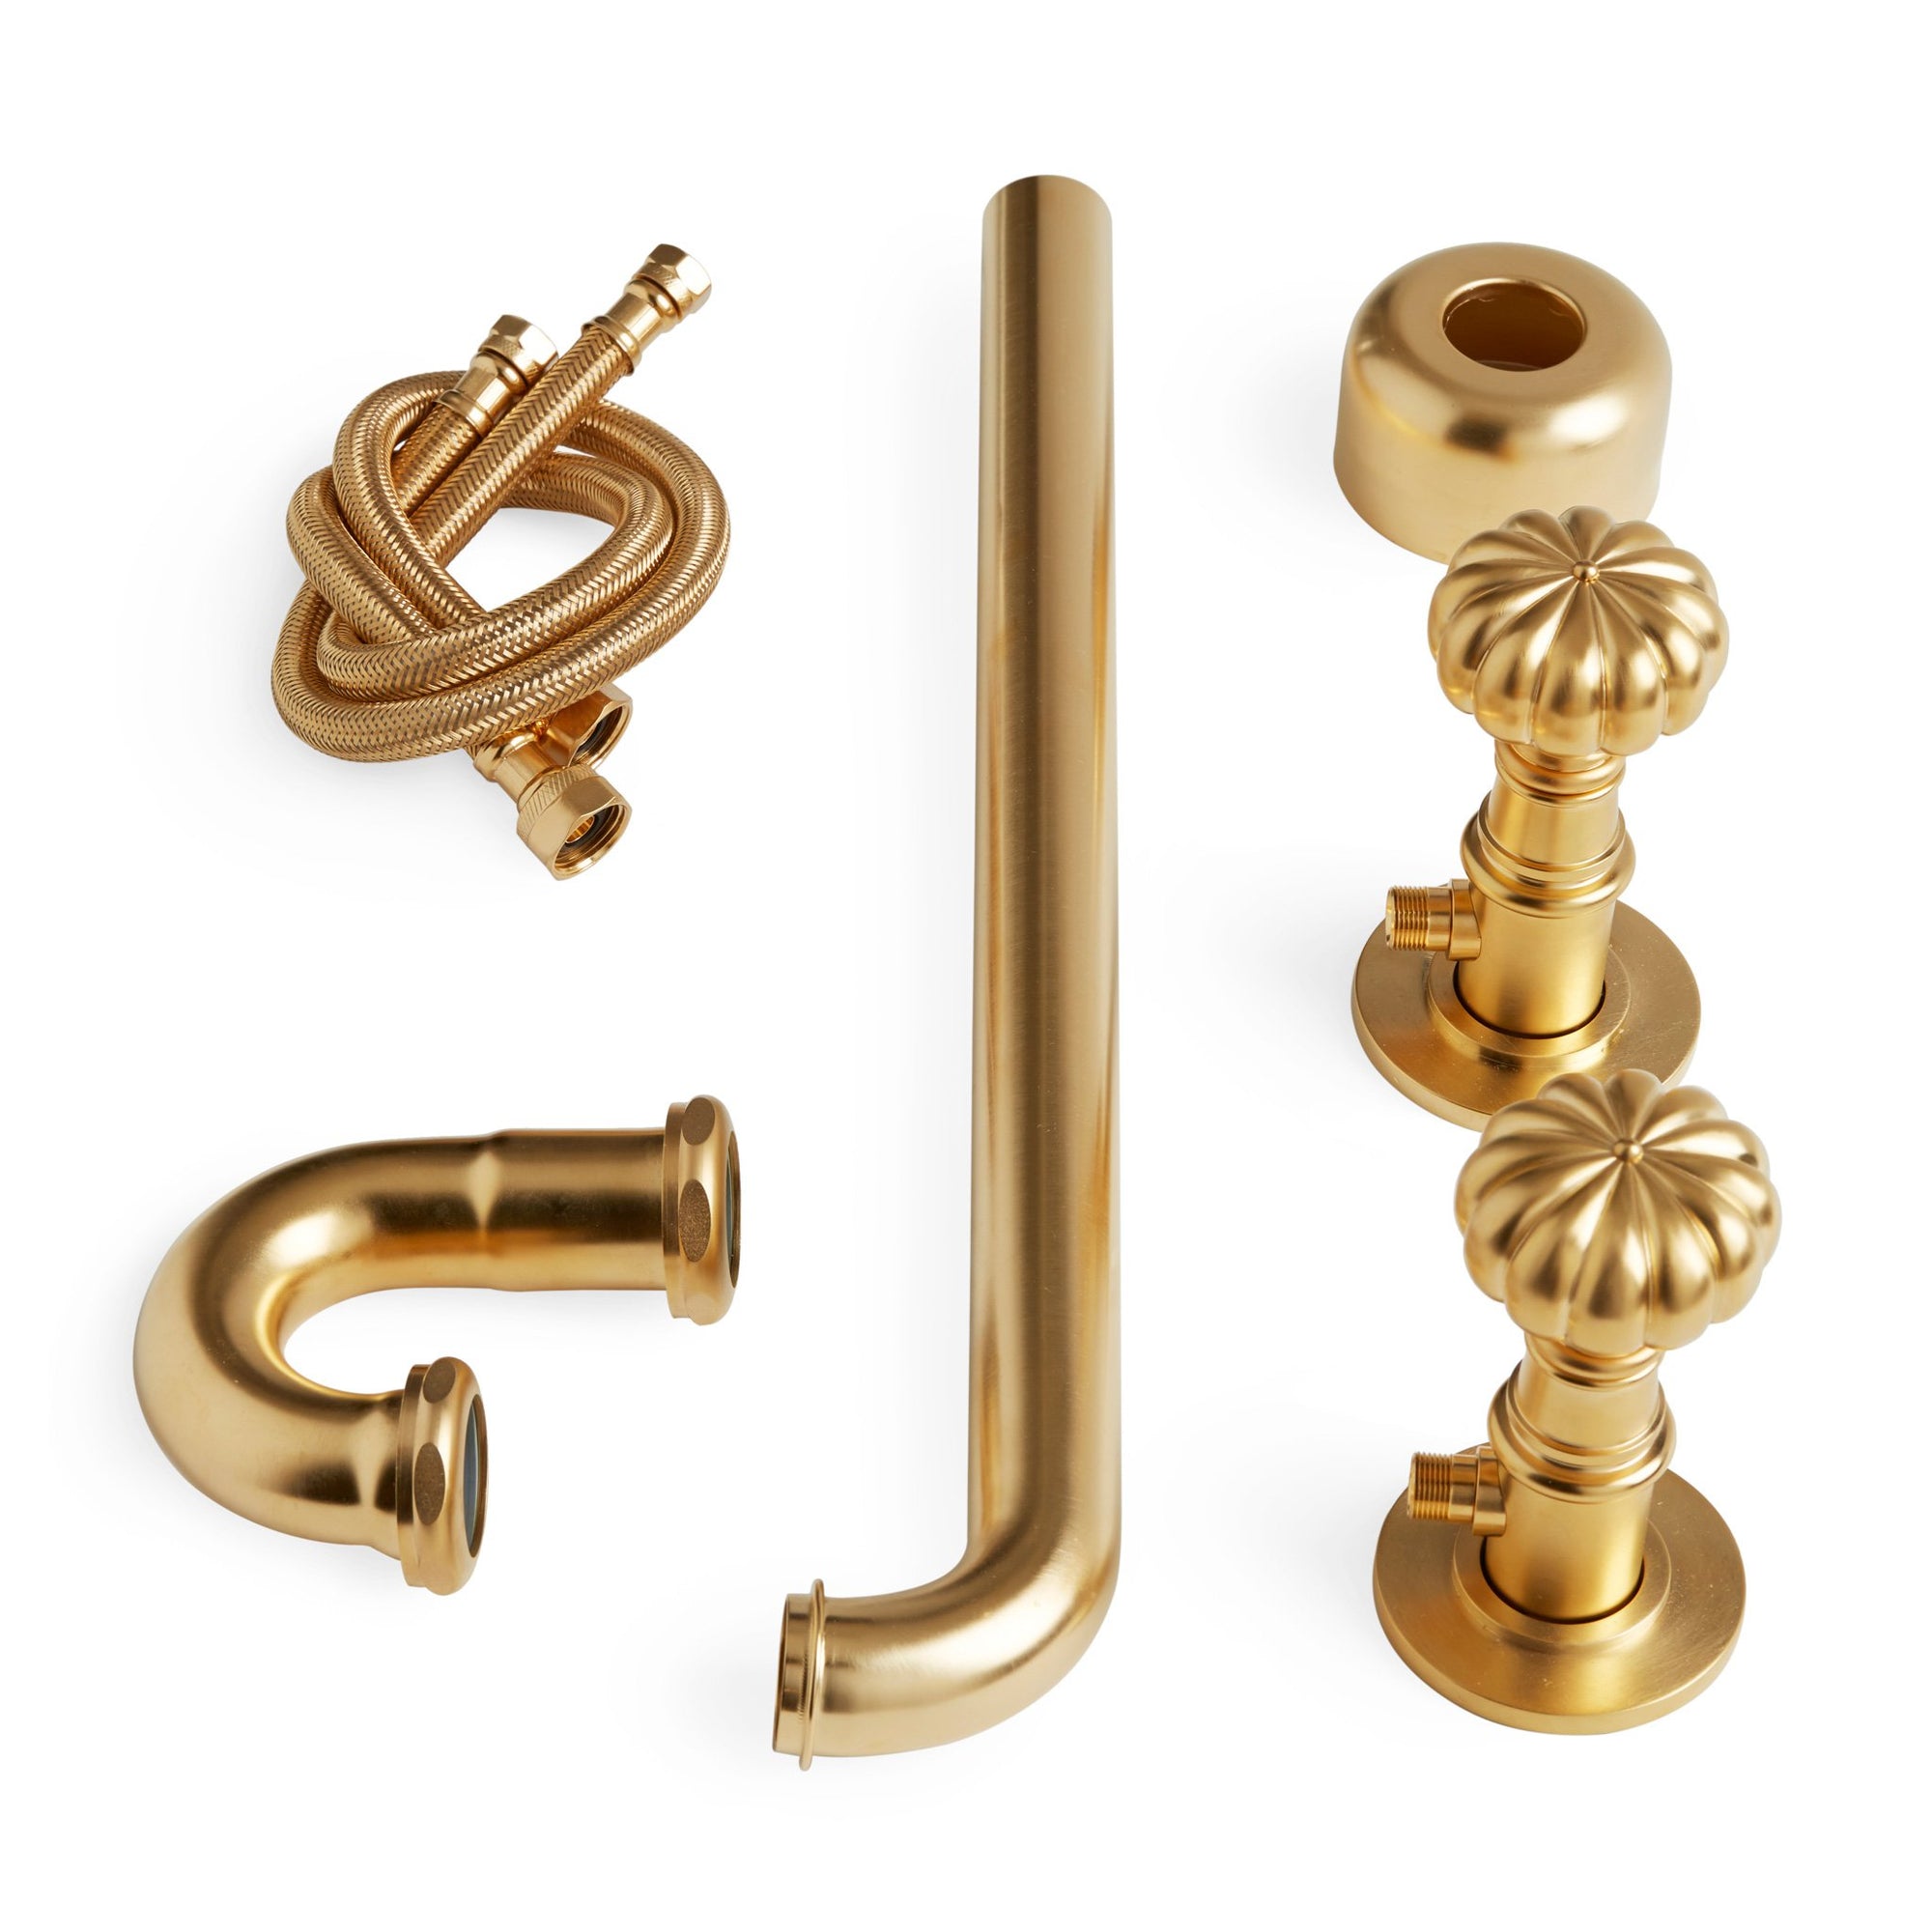 2951-EXT-0910-GP Sherle Wagner International Pair of Melon Knob Shut off Valves with Extended P-Trap in Gold Plate metal finish